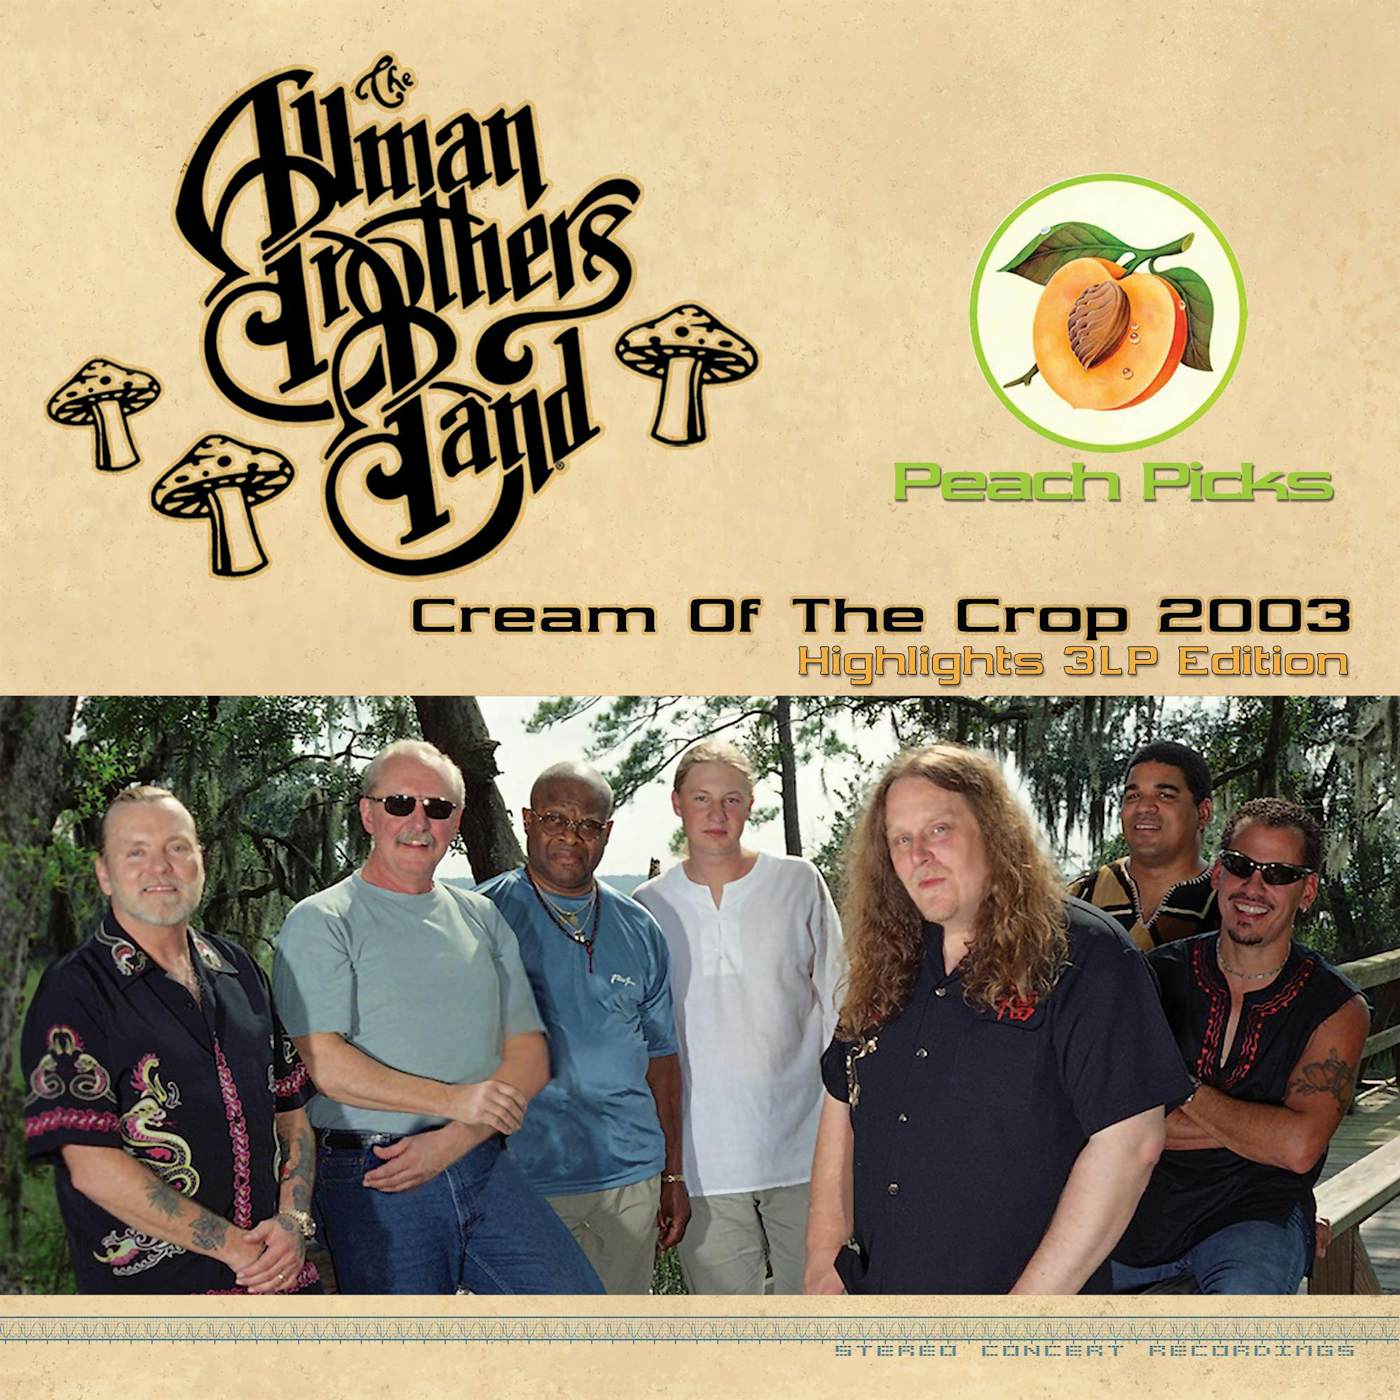 Allman Brothers Band Cream Of The Crop 2003 - Highlights Vinyl Record